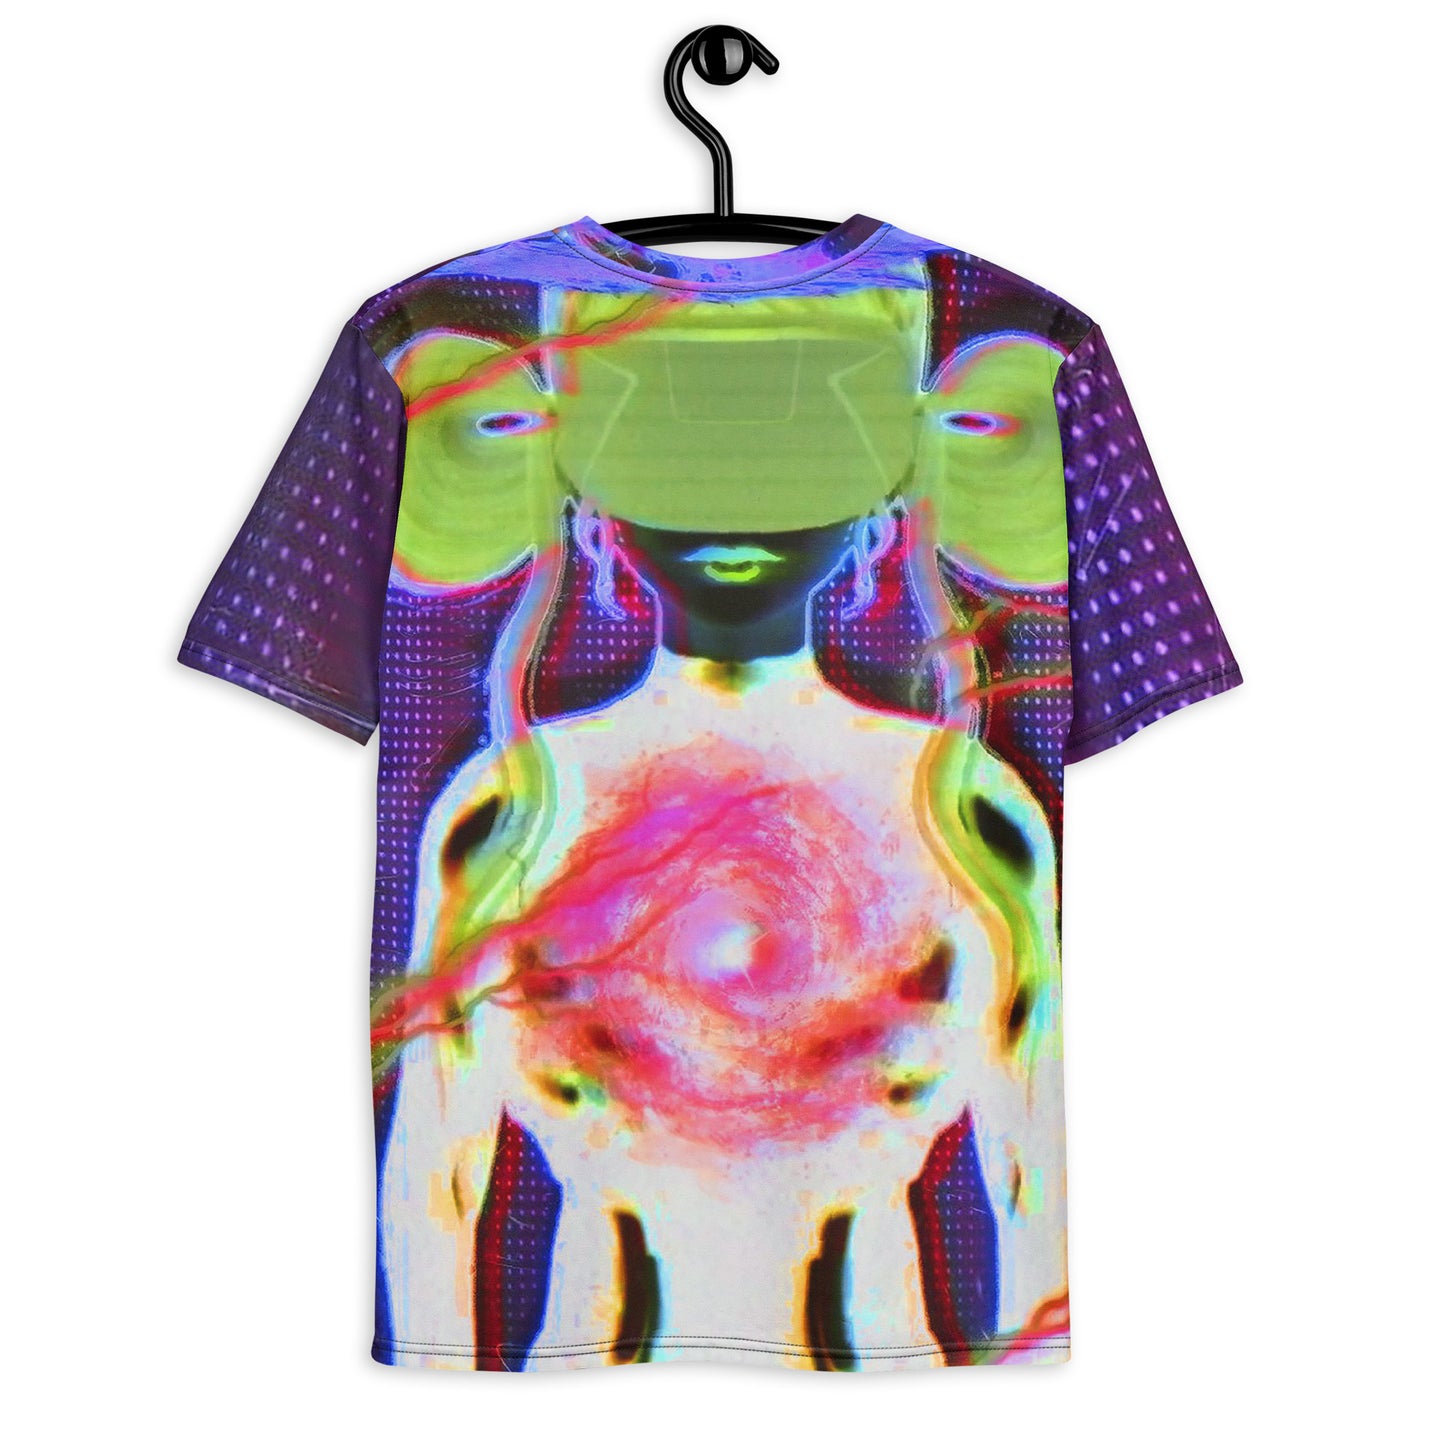 CYBERB*TCH ALL-OVER SHIRT